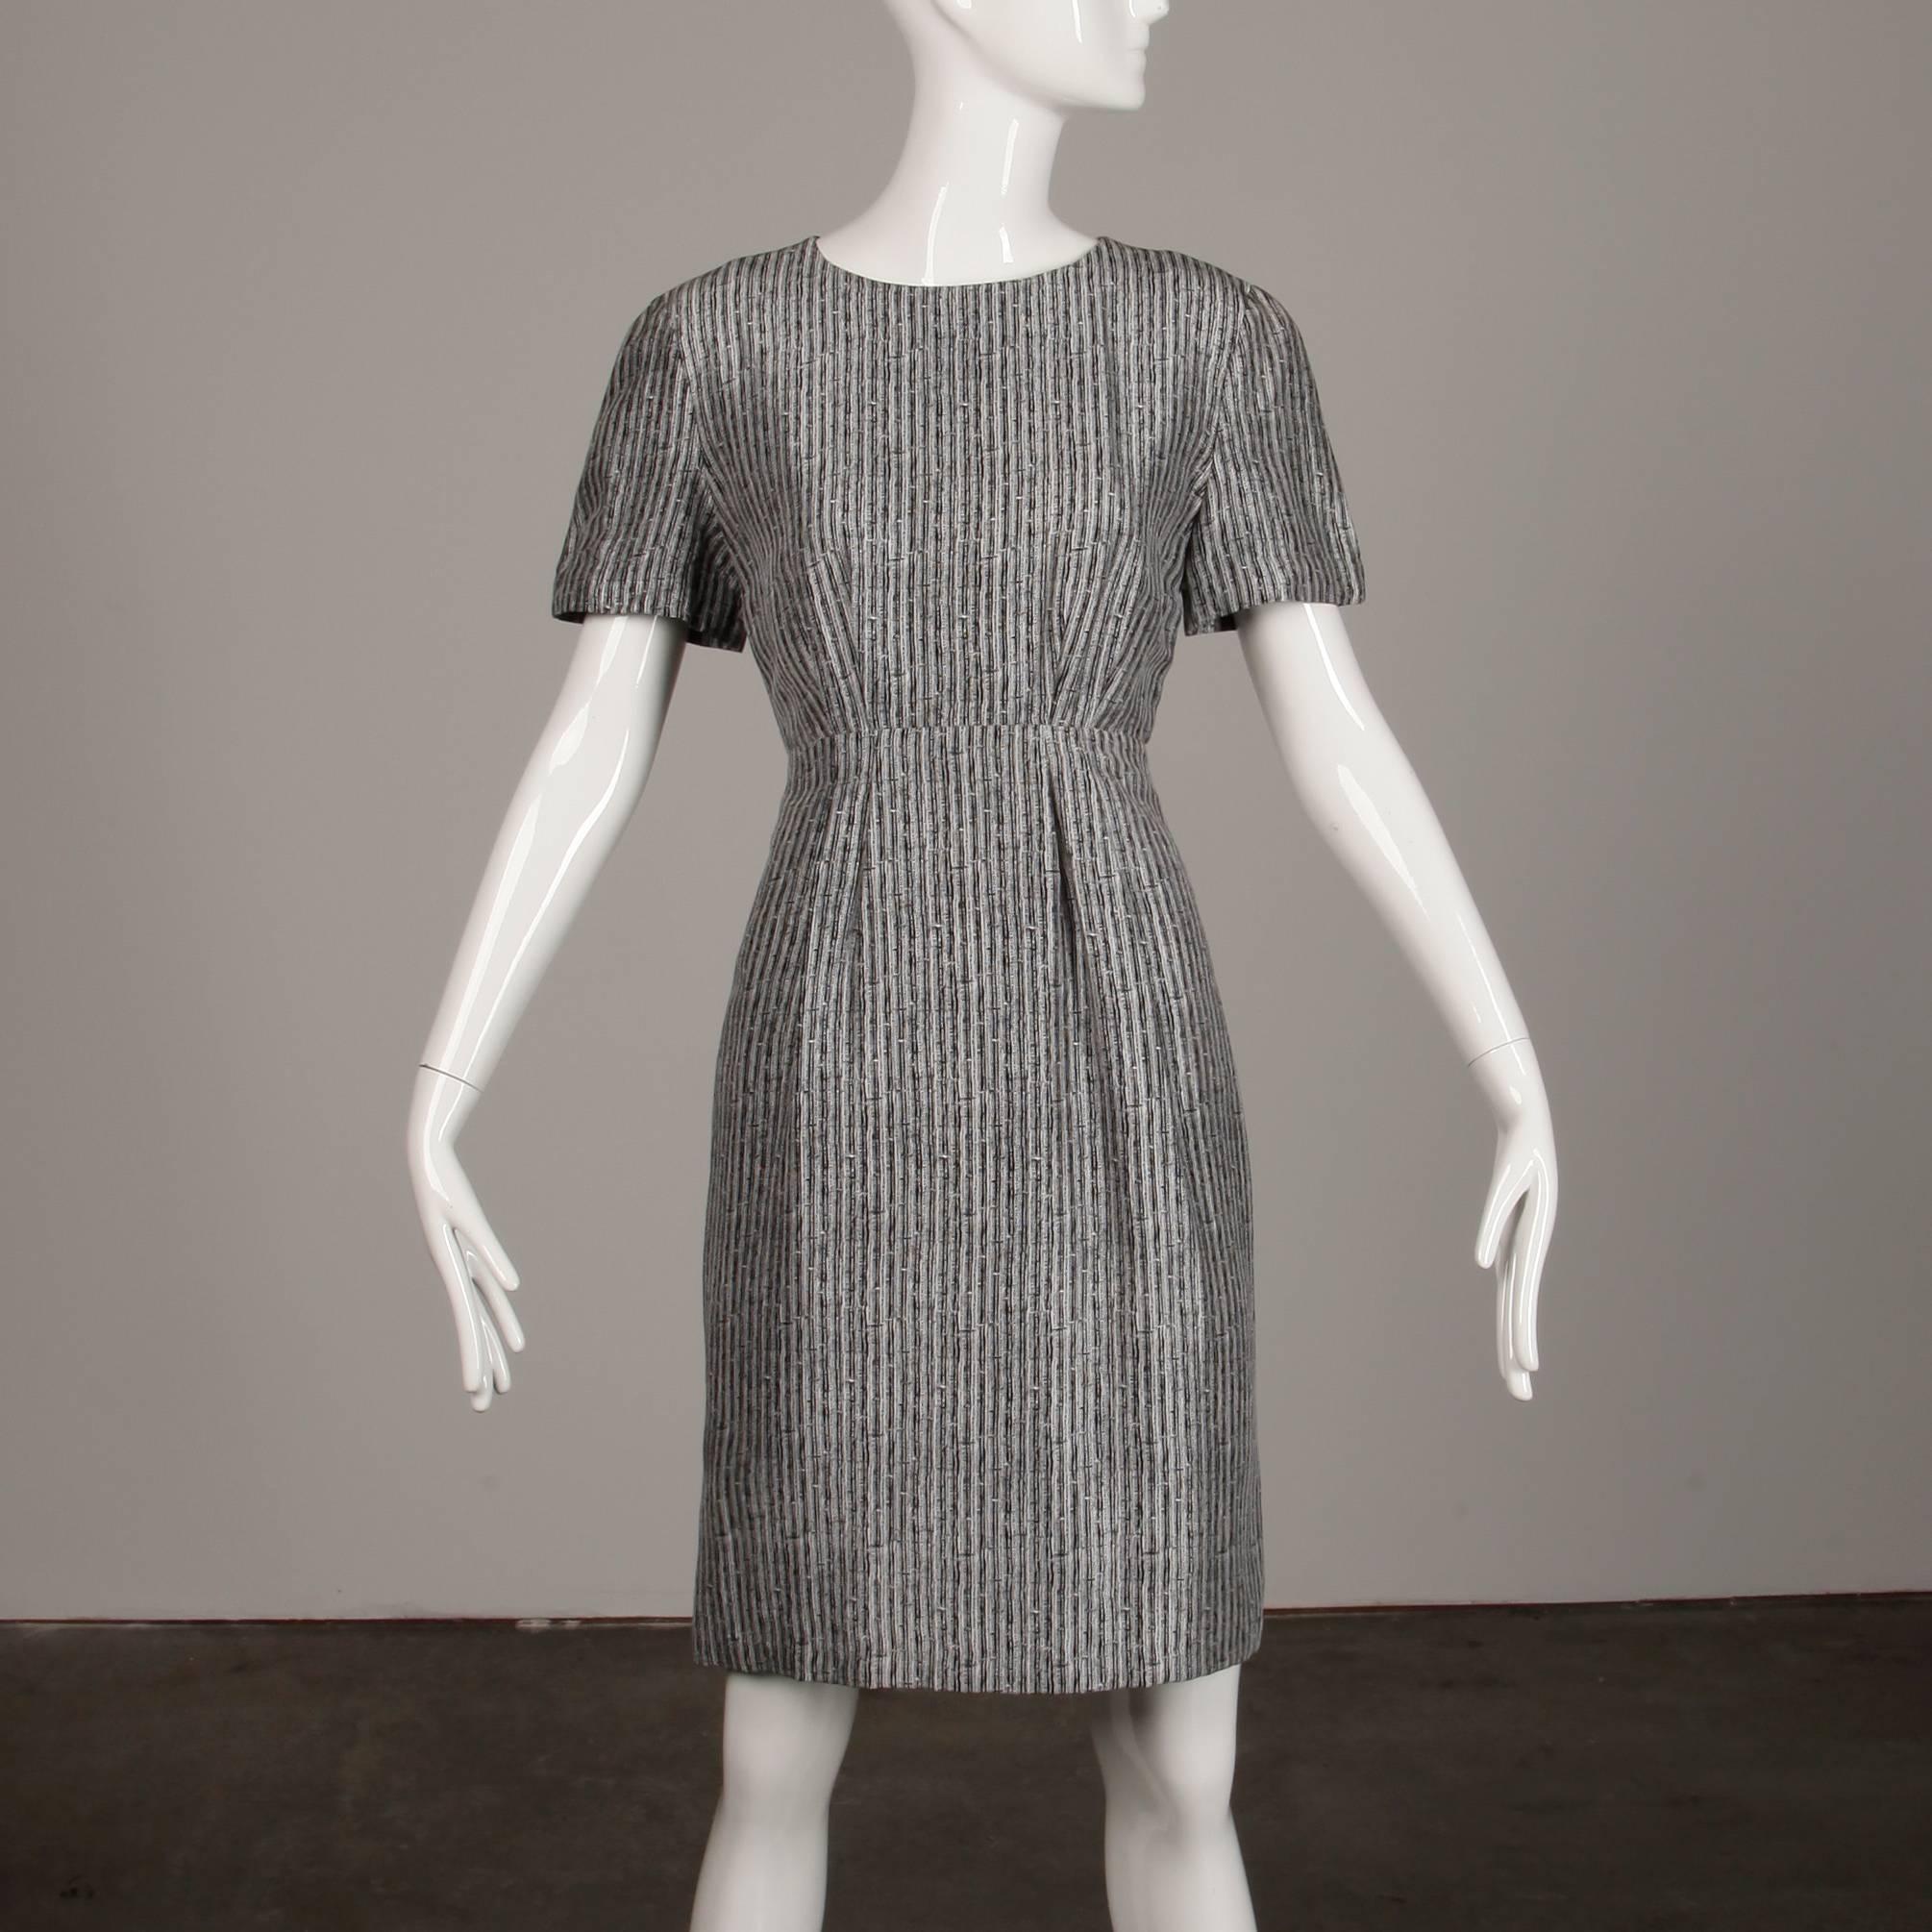 Simple and chic vintage silk sheath dress by Adele Simpson with a black and white print. Fully lined with rear zip closure. The marked size is 6, and the dress fits true to size. 100% silk. The bust measures 36